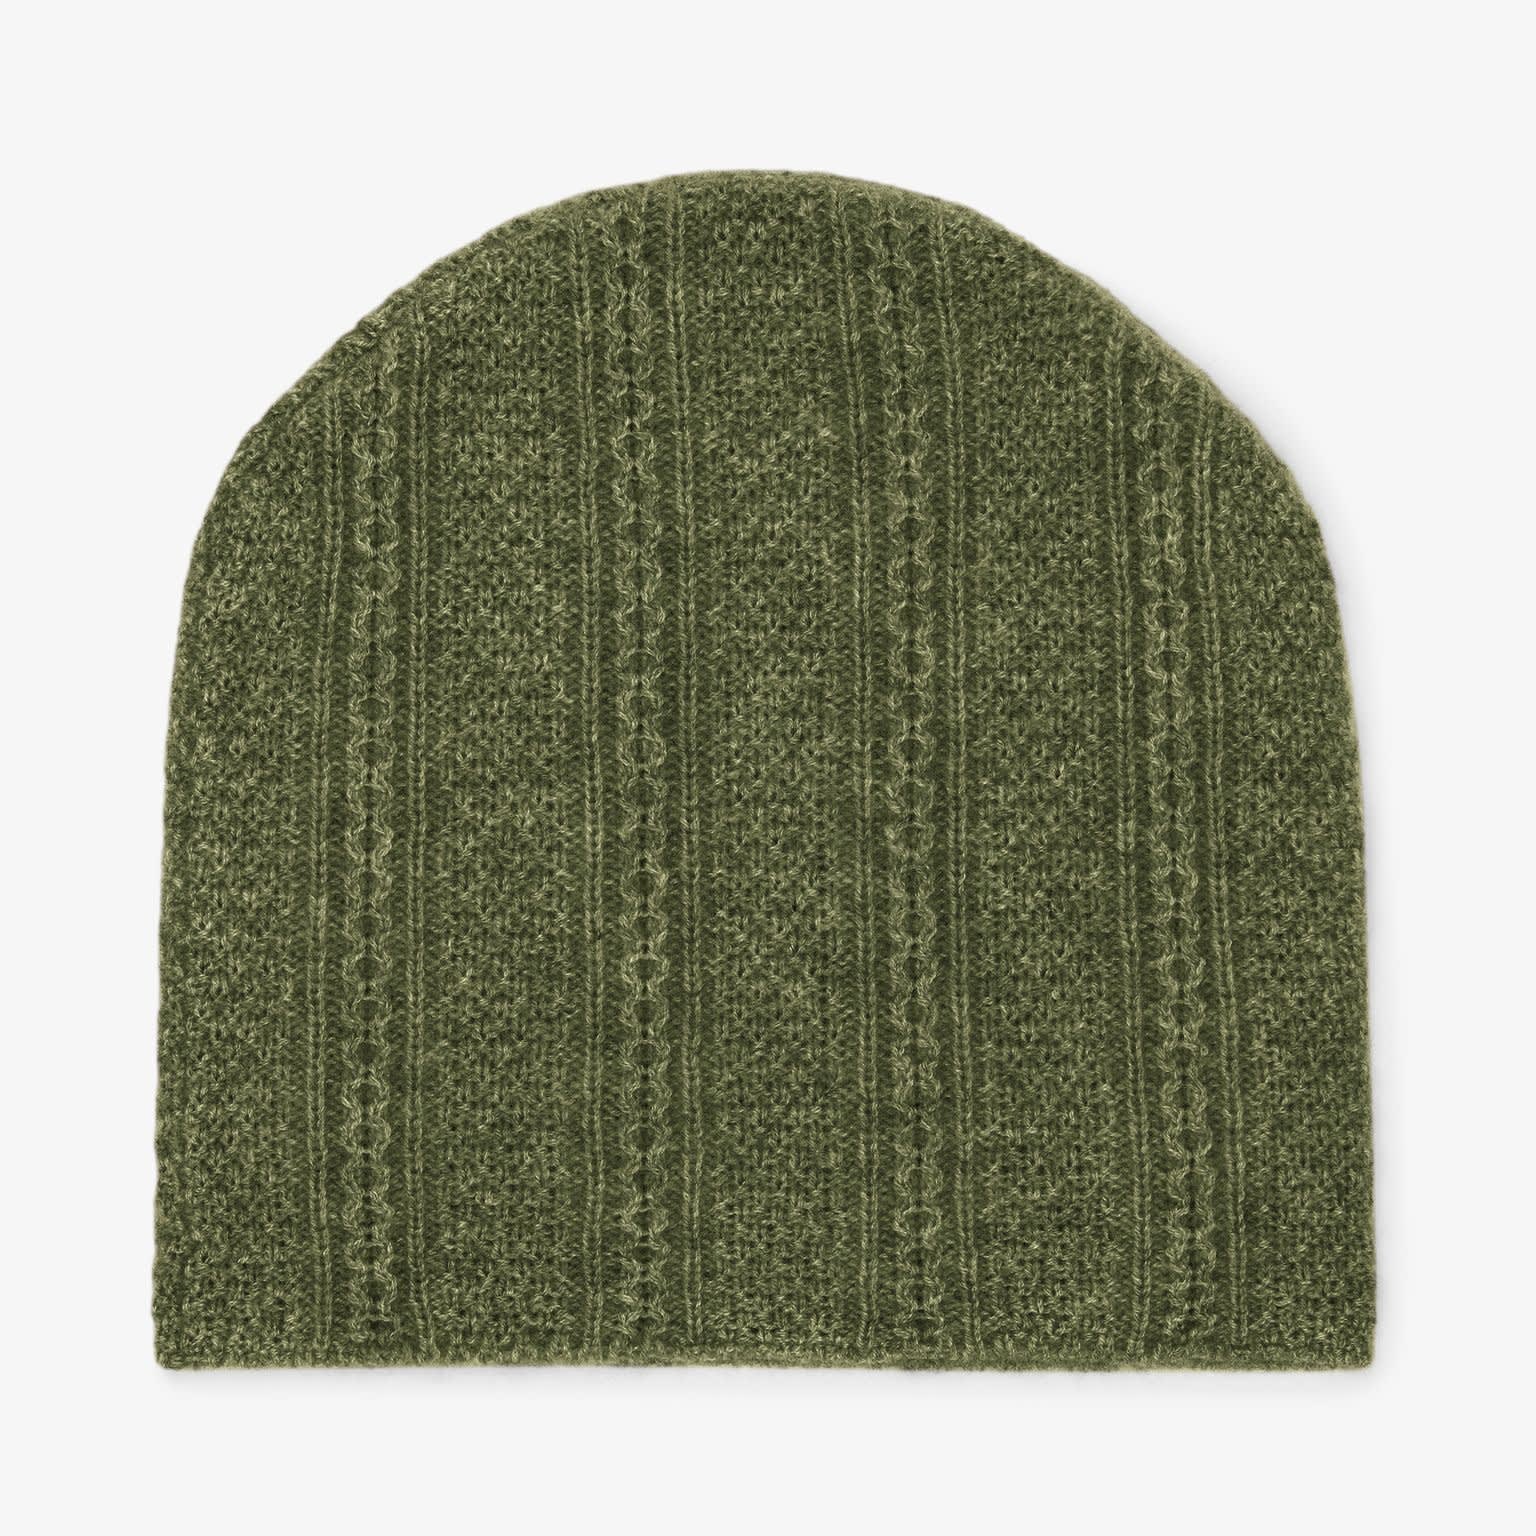 Packshot image of the Circle Cable Beanie—Cashmere in Olive 